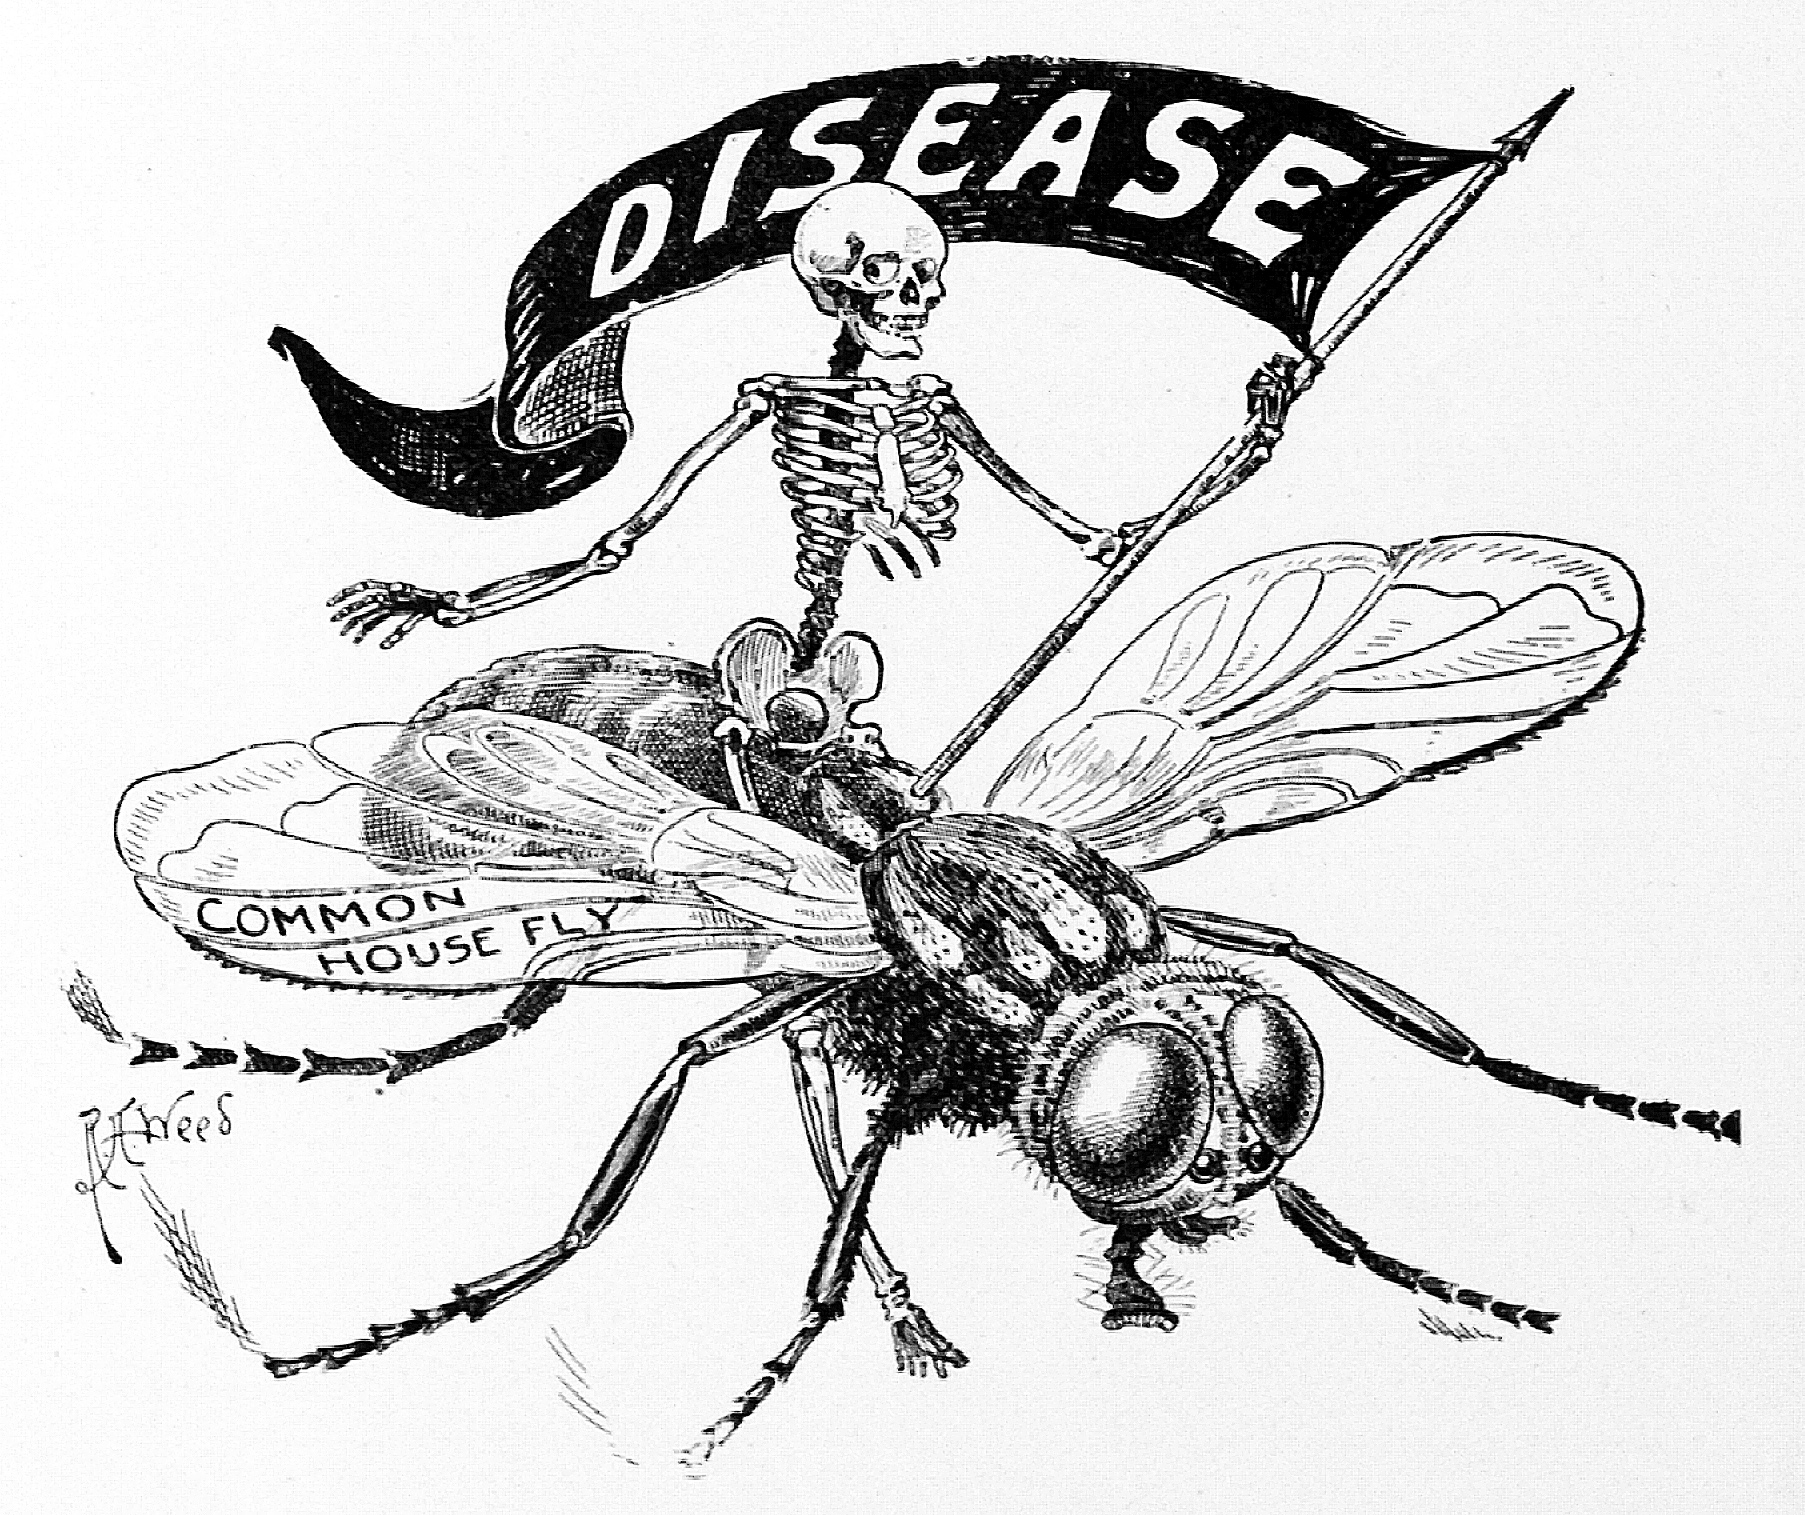 Cartoon illustrating house fly carrying disease.